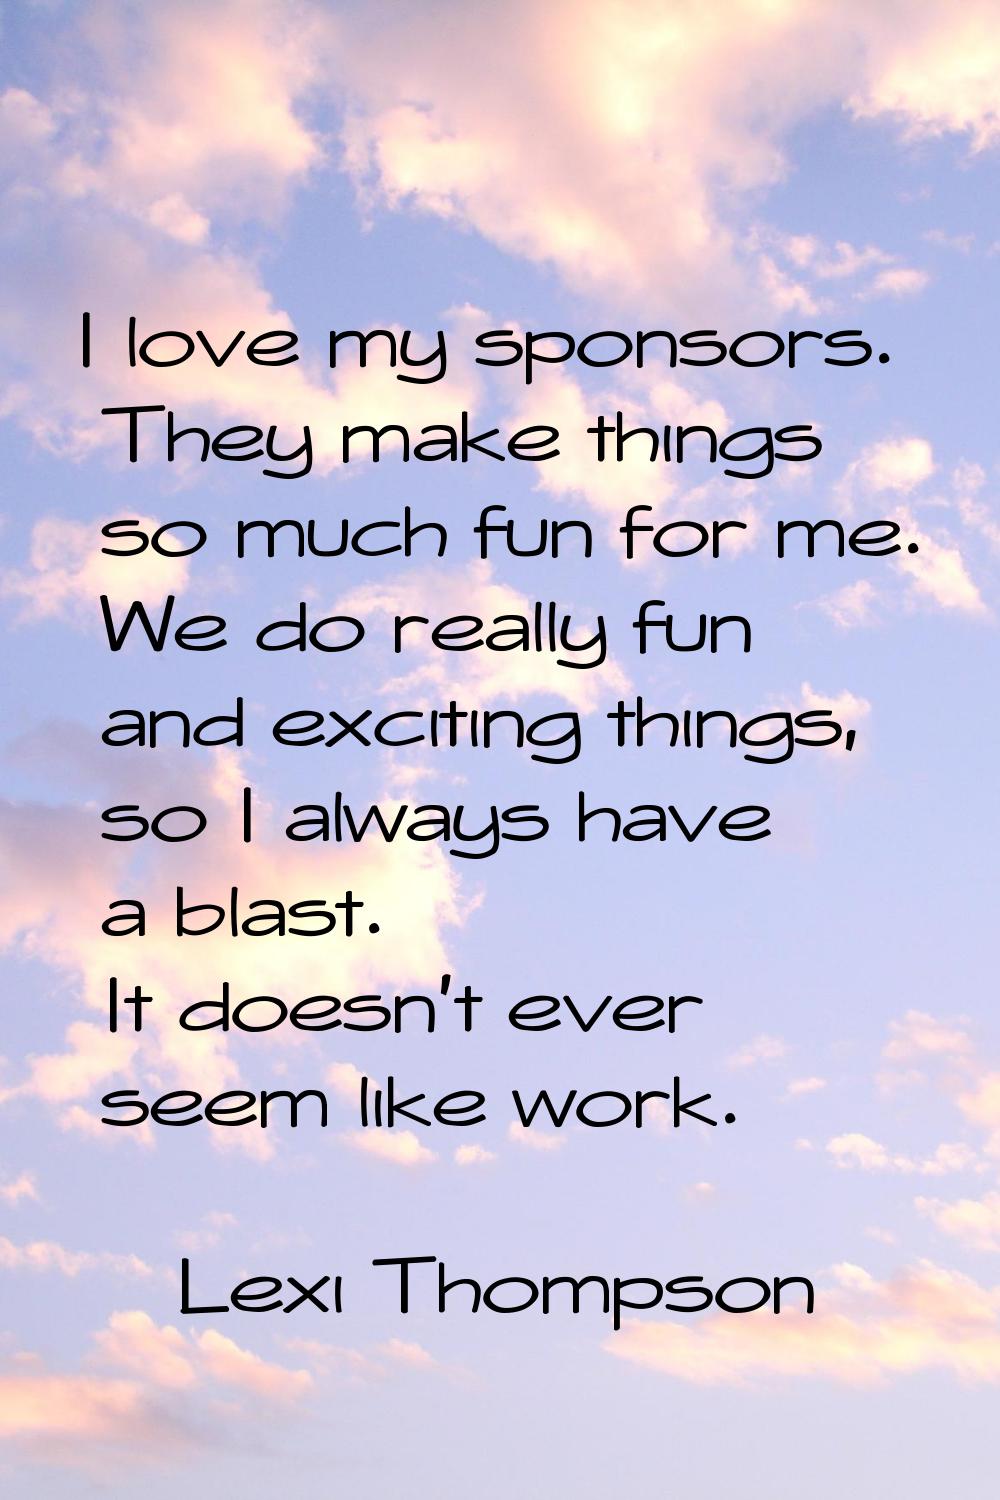 I love my sponsors. They make things so much fun for me. We do really fun and exciting things, so I